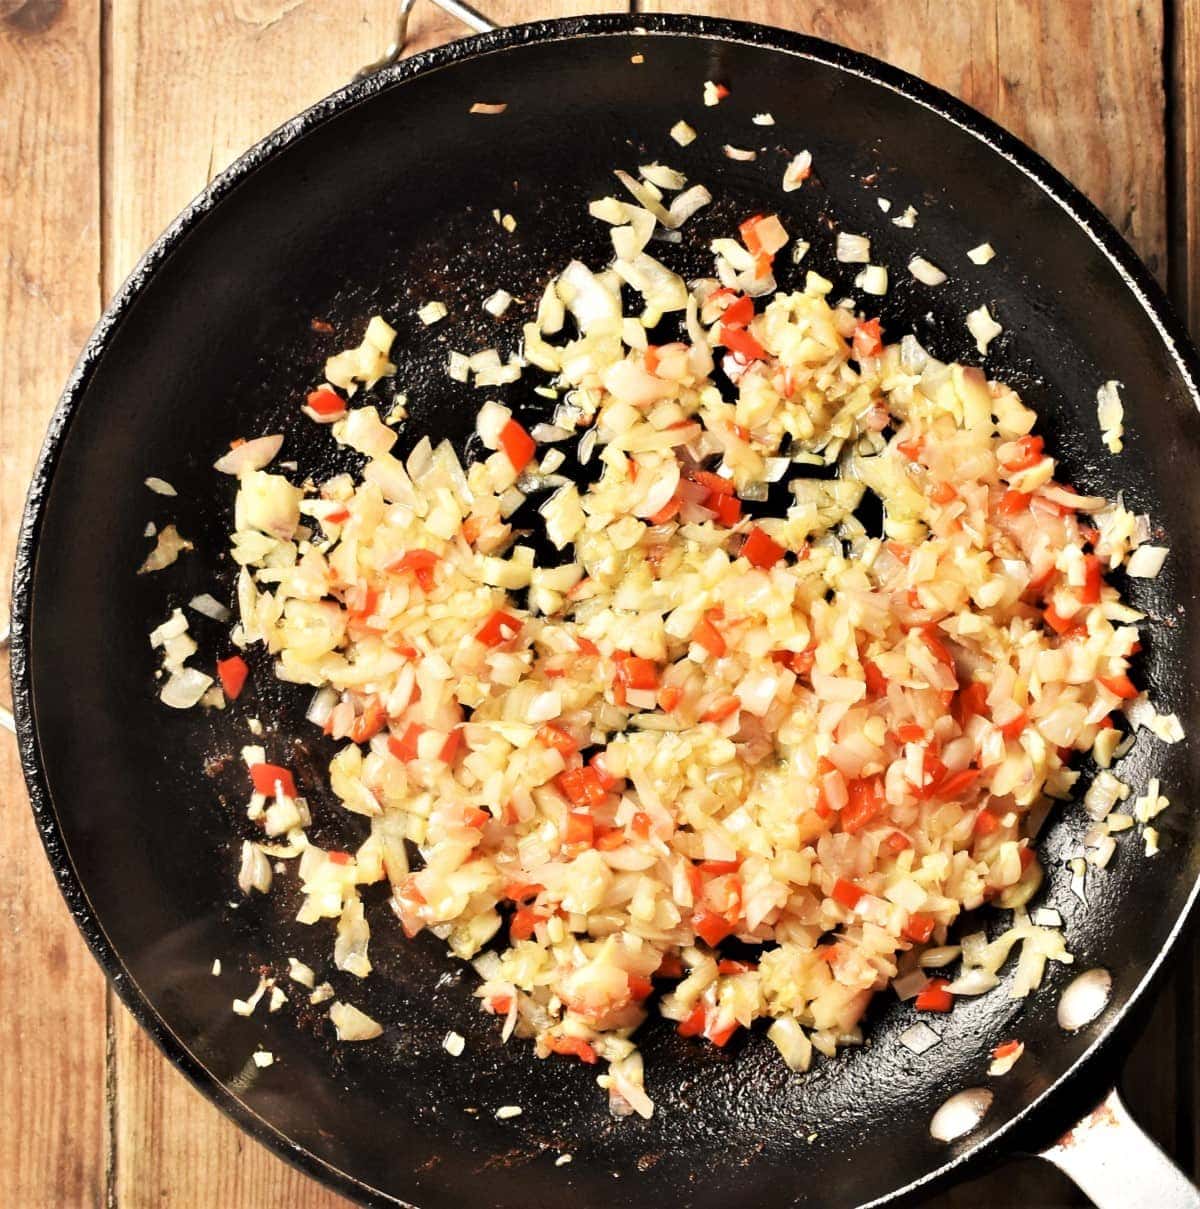 Chopped onion and pepper in large pan.